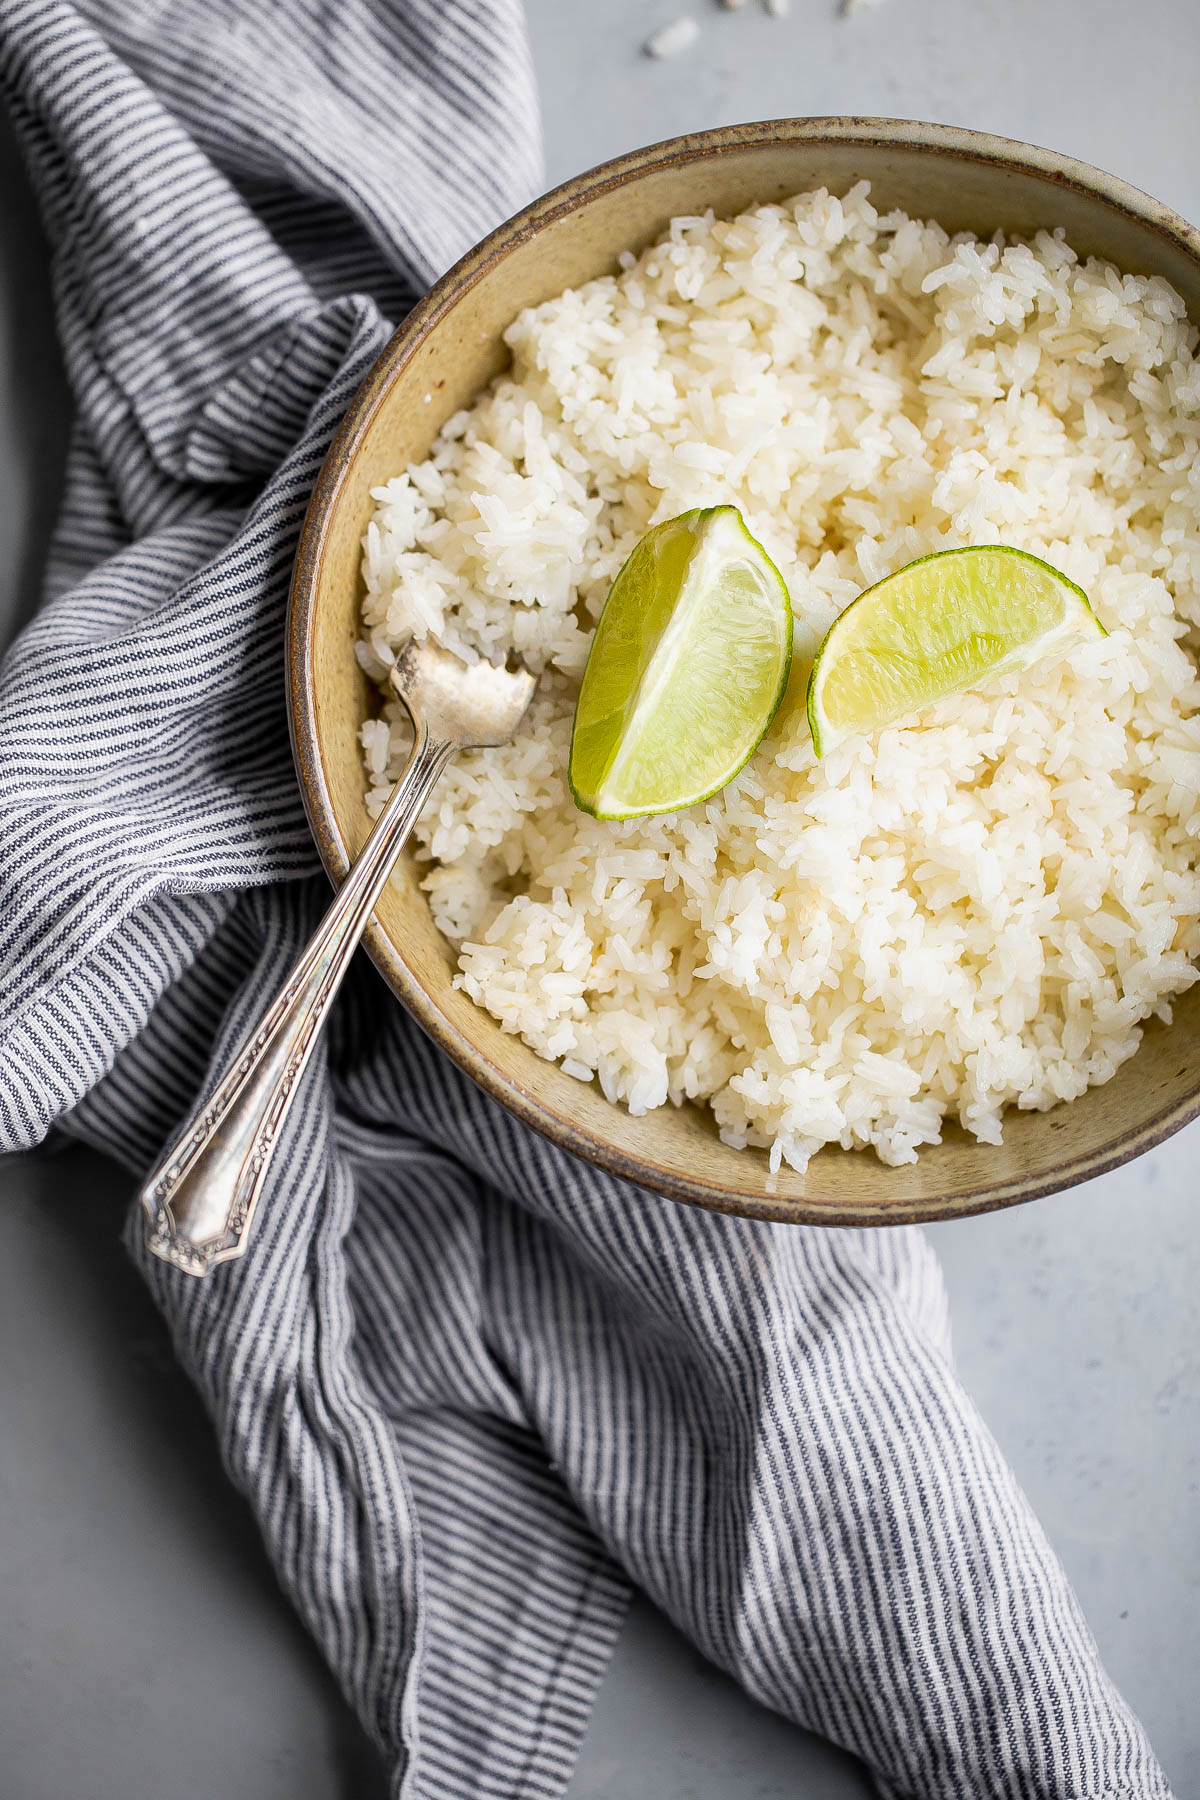 Coconut Rice Recipe (How to Make Coconut Rice) - A Beautiful Plate